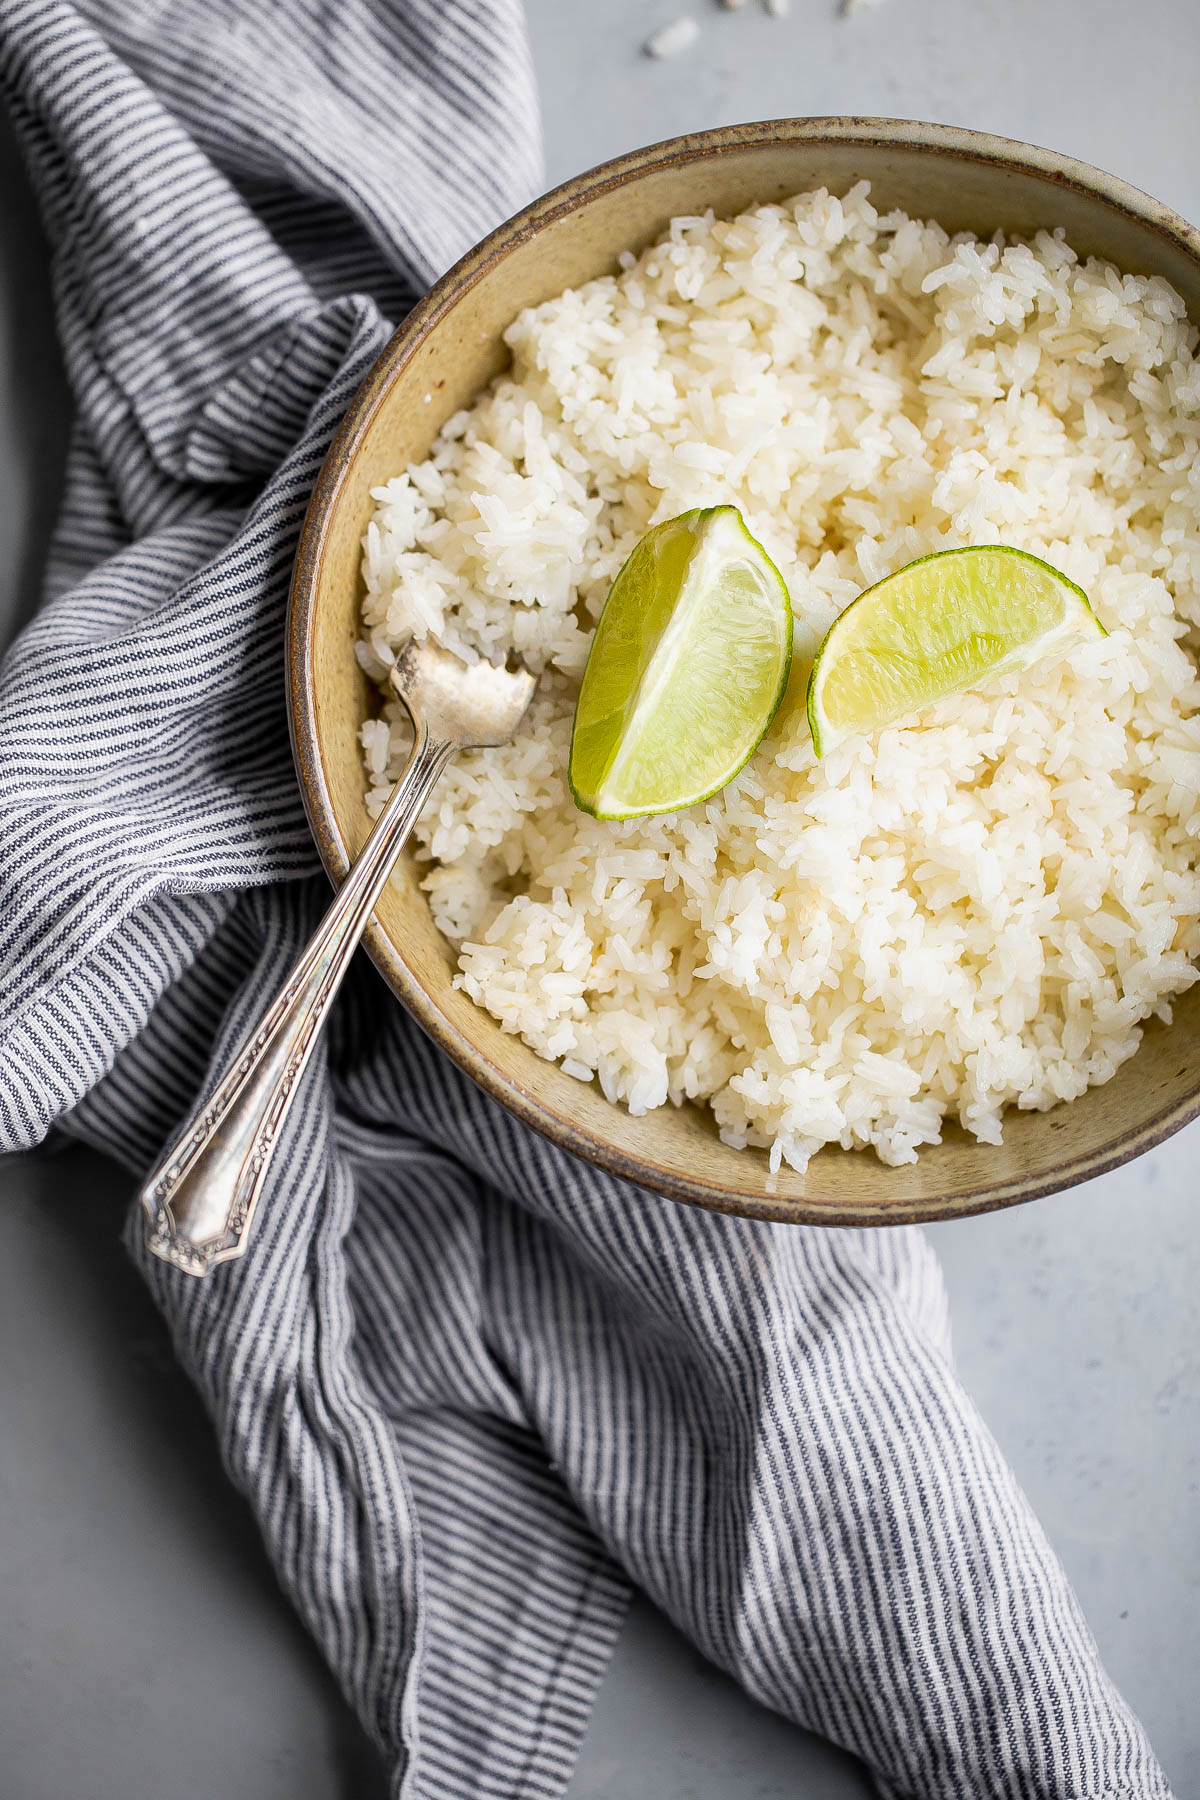 Coconut Rice Recipe (How to Make Coconut Rice) - A Beautiful Plate